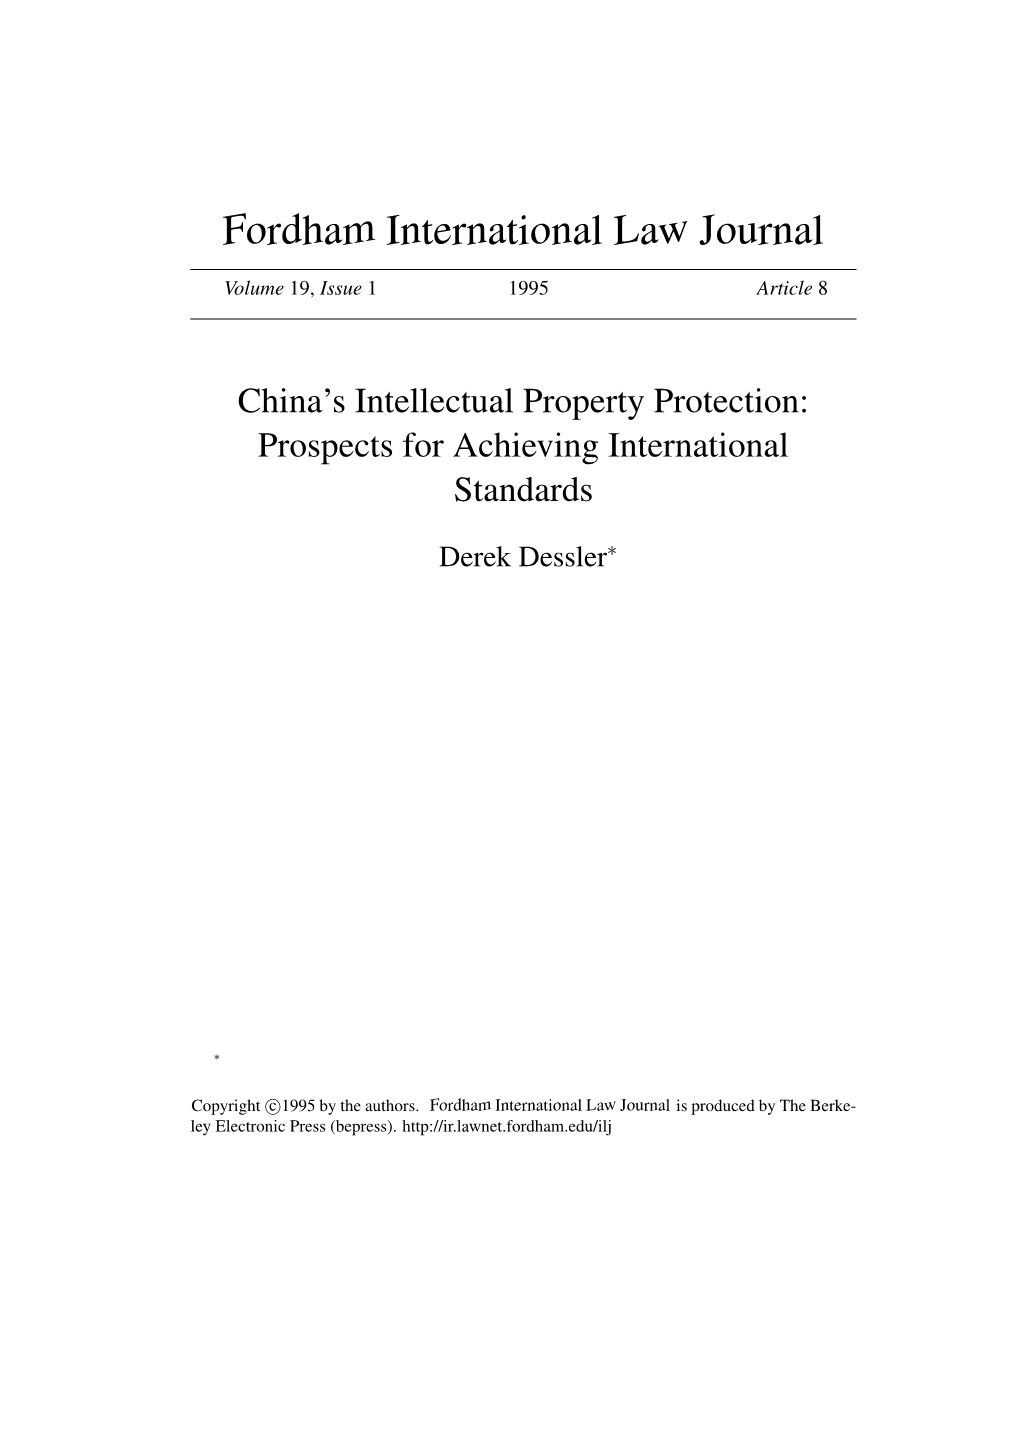 China's Intellectual Property Protection: Prospects for Achieving International Standards